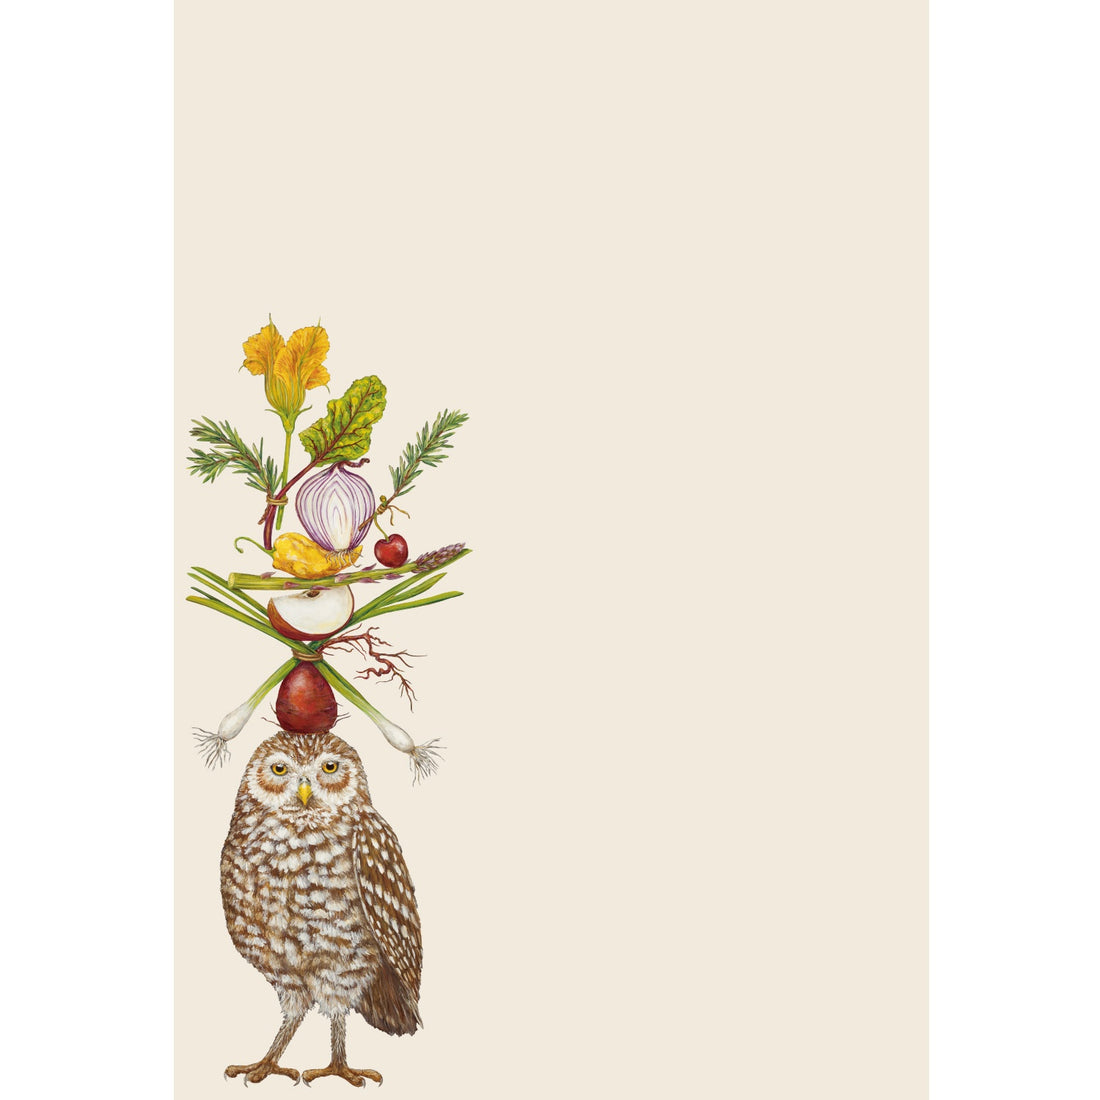 An illustration of an owl with a balanced stack of vegetables and flowers on its head adorns these Hester &amp; Cook Vegetarian Owl Note Pads.